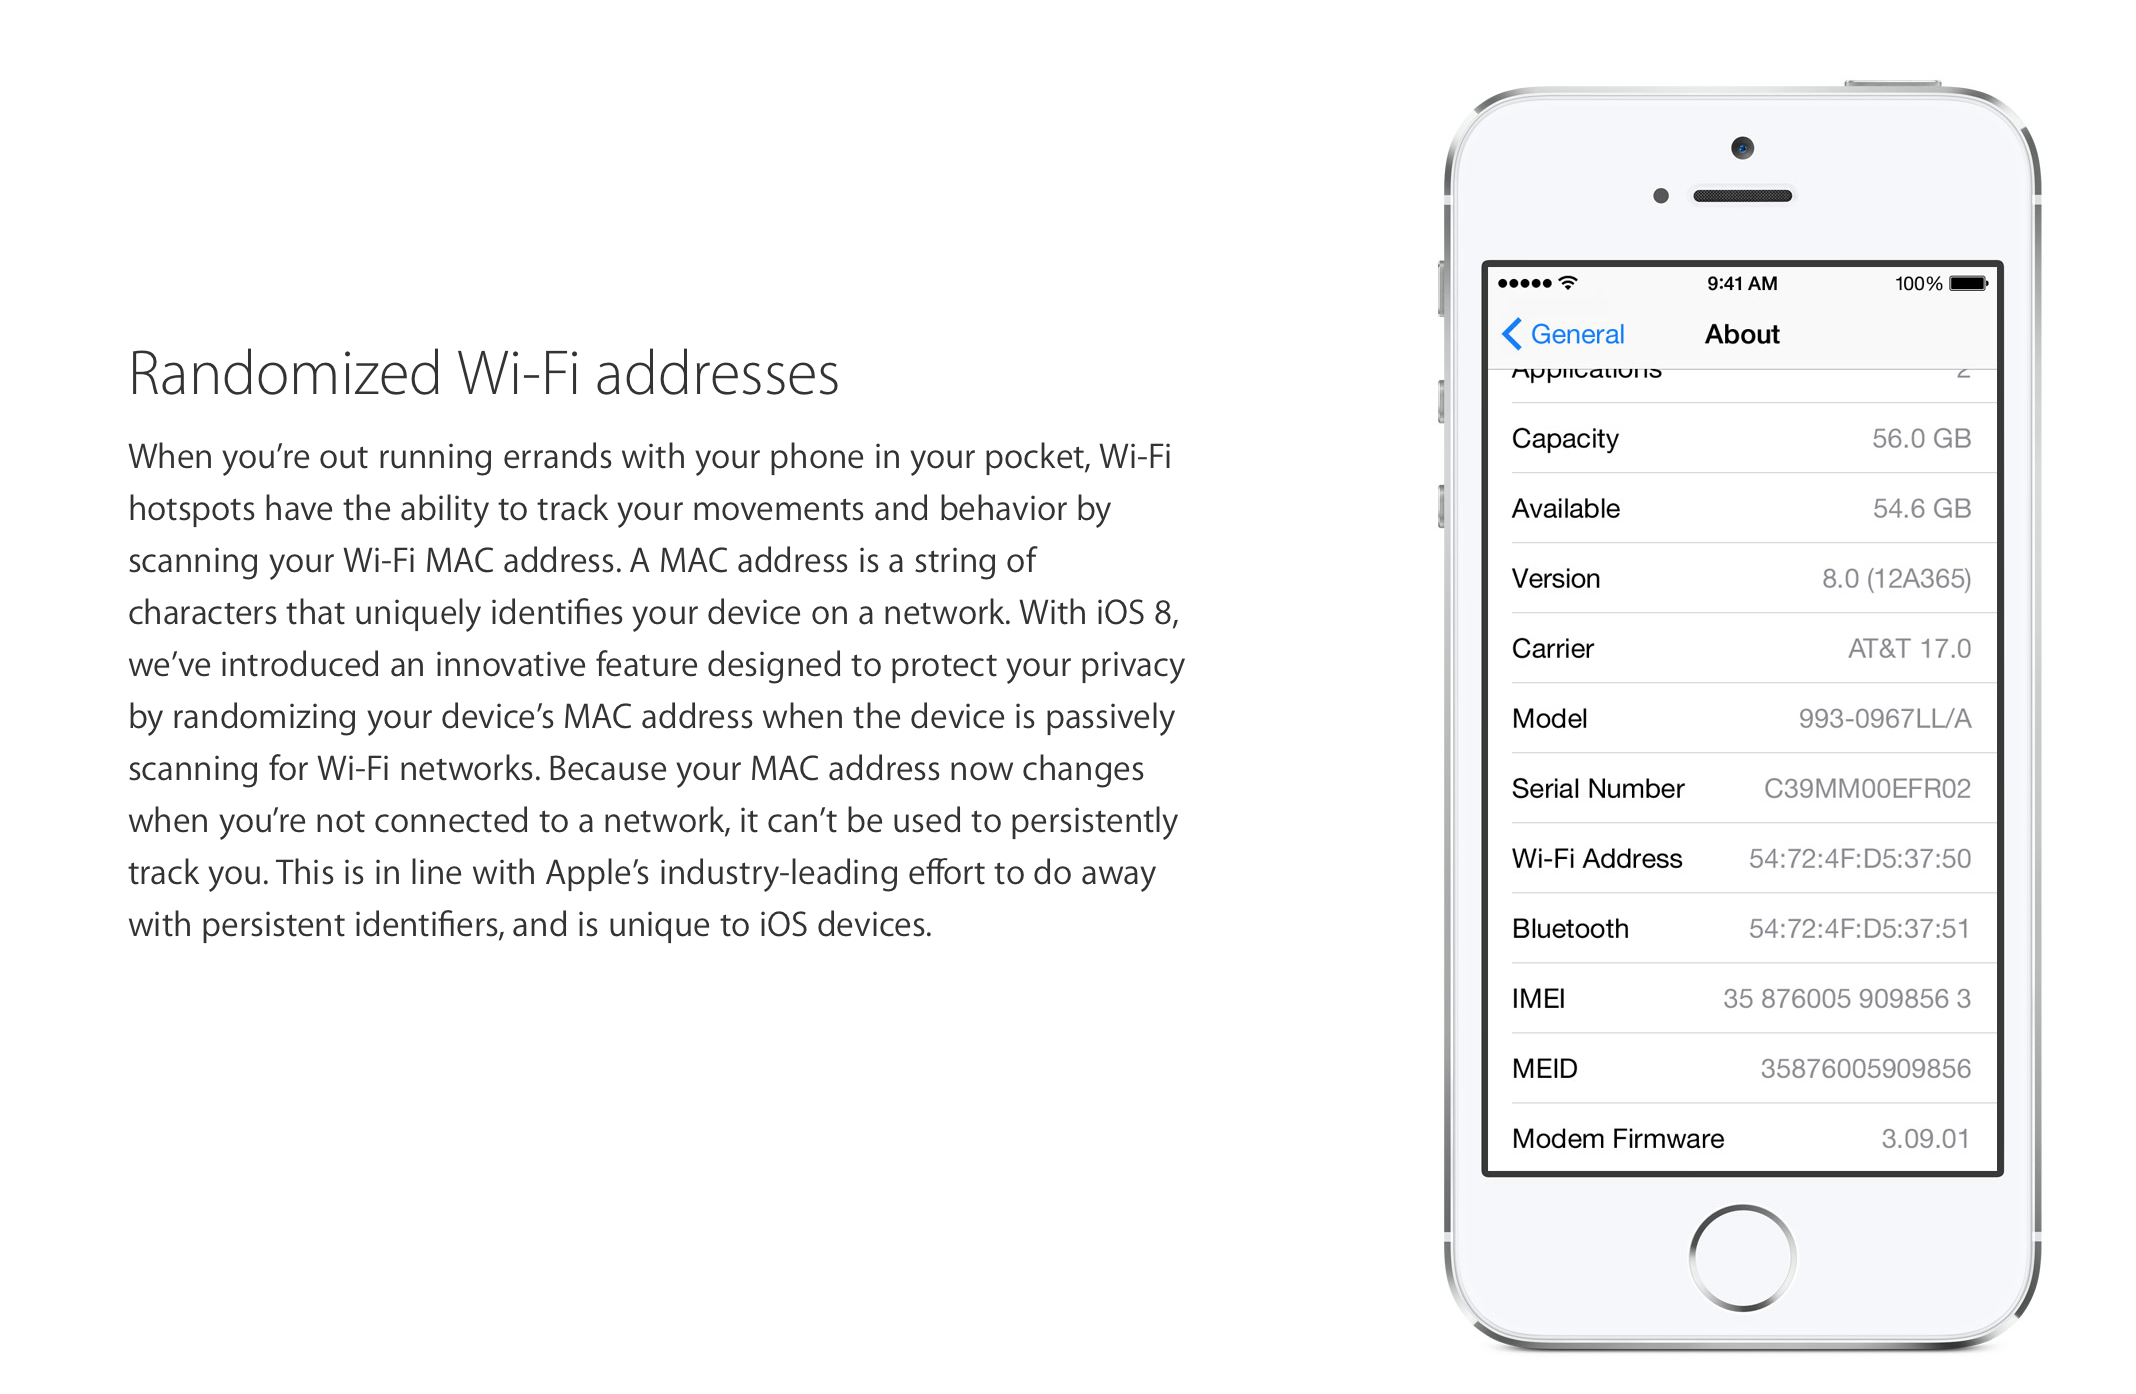 iOS8 and location-tracking of the MAC address